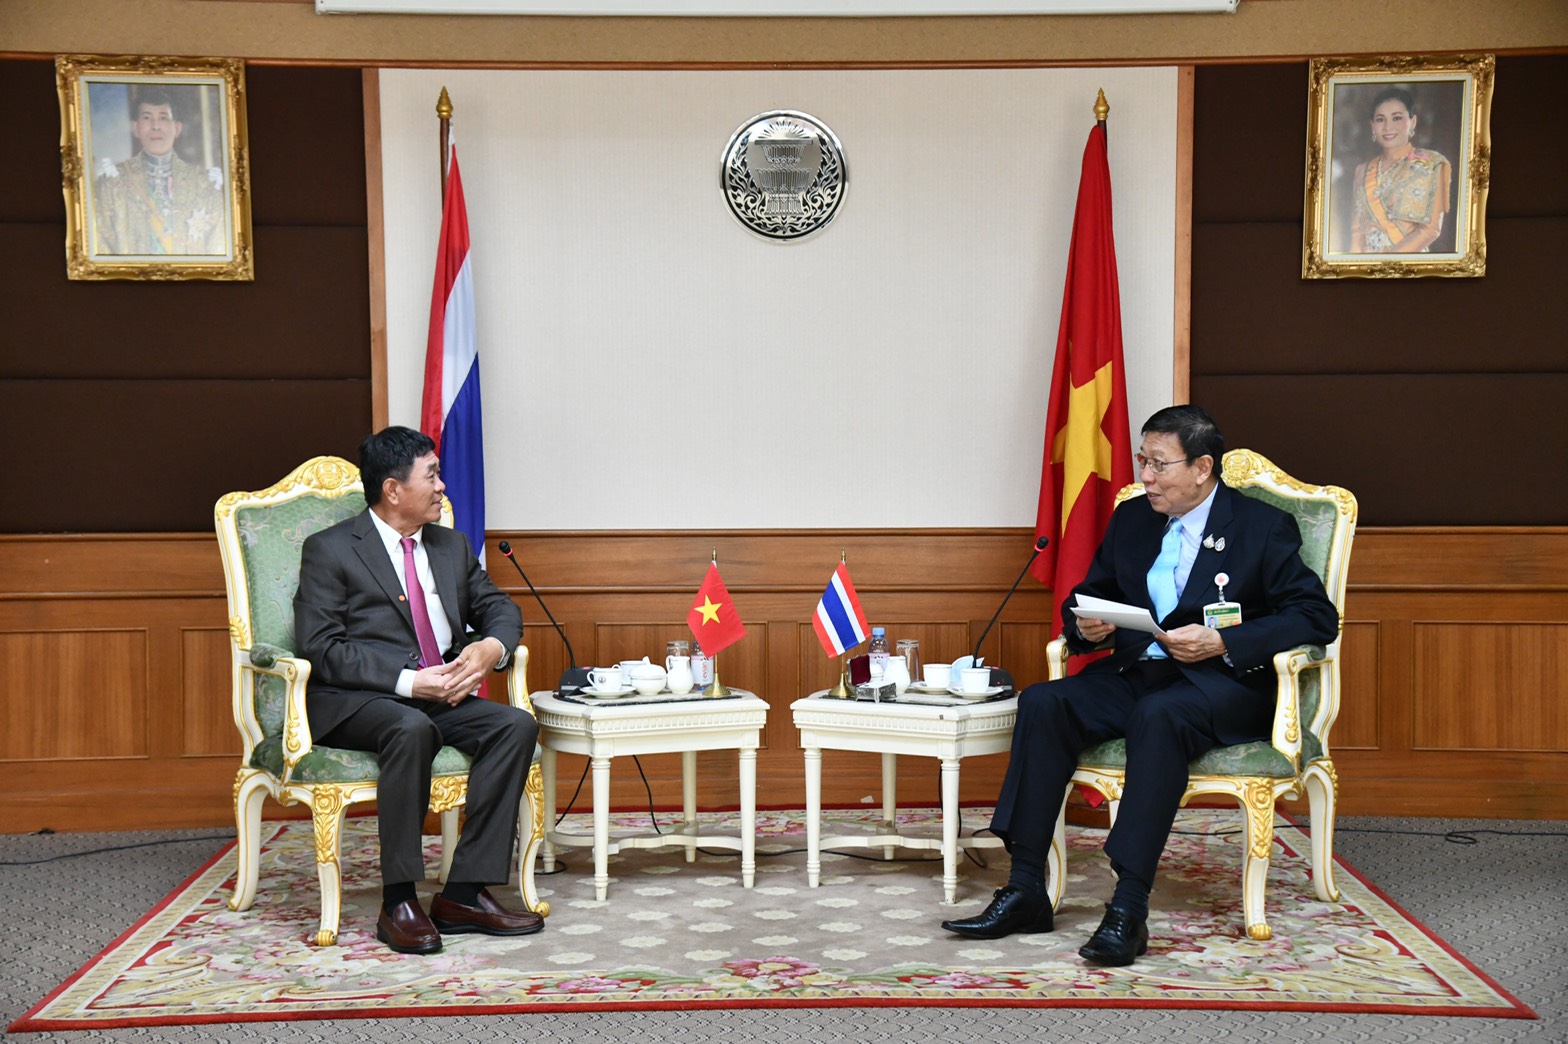 Ambassador of the Socialist Republic of Vietnam to Thailand paid a courtesy call on the President of the Senate to bid farewell on completion of his duty (Friday 28 August 2020)